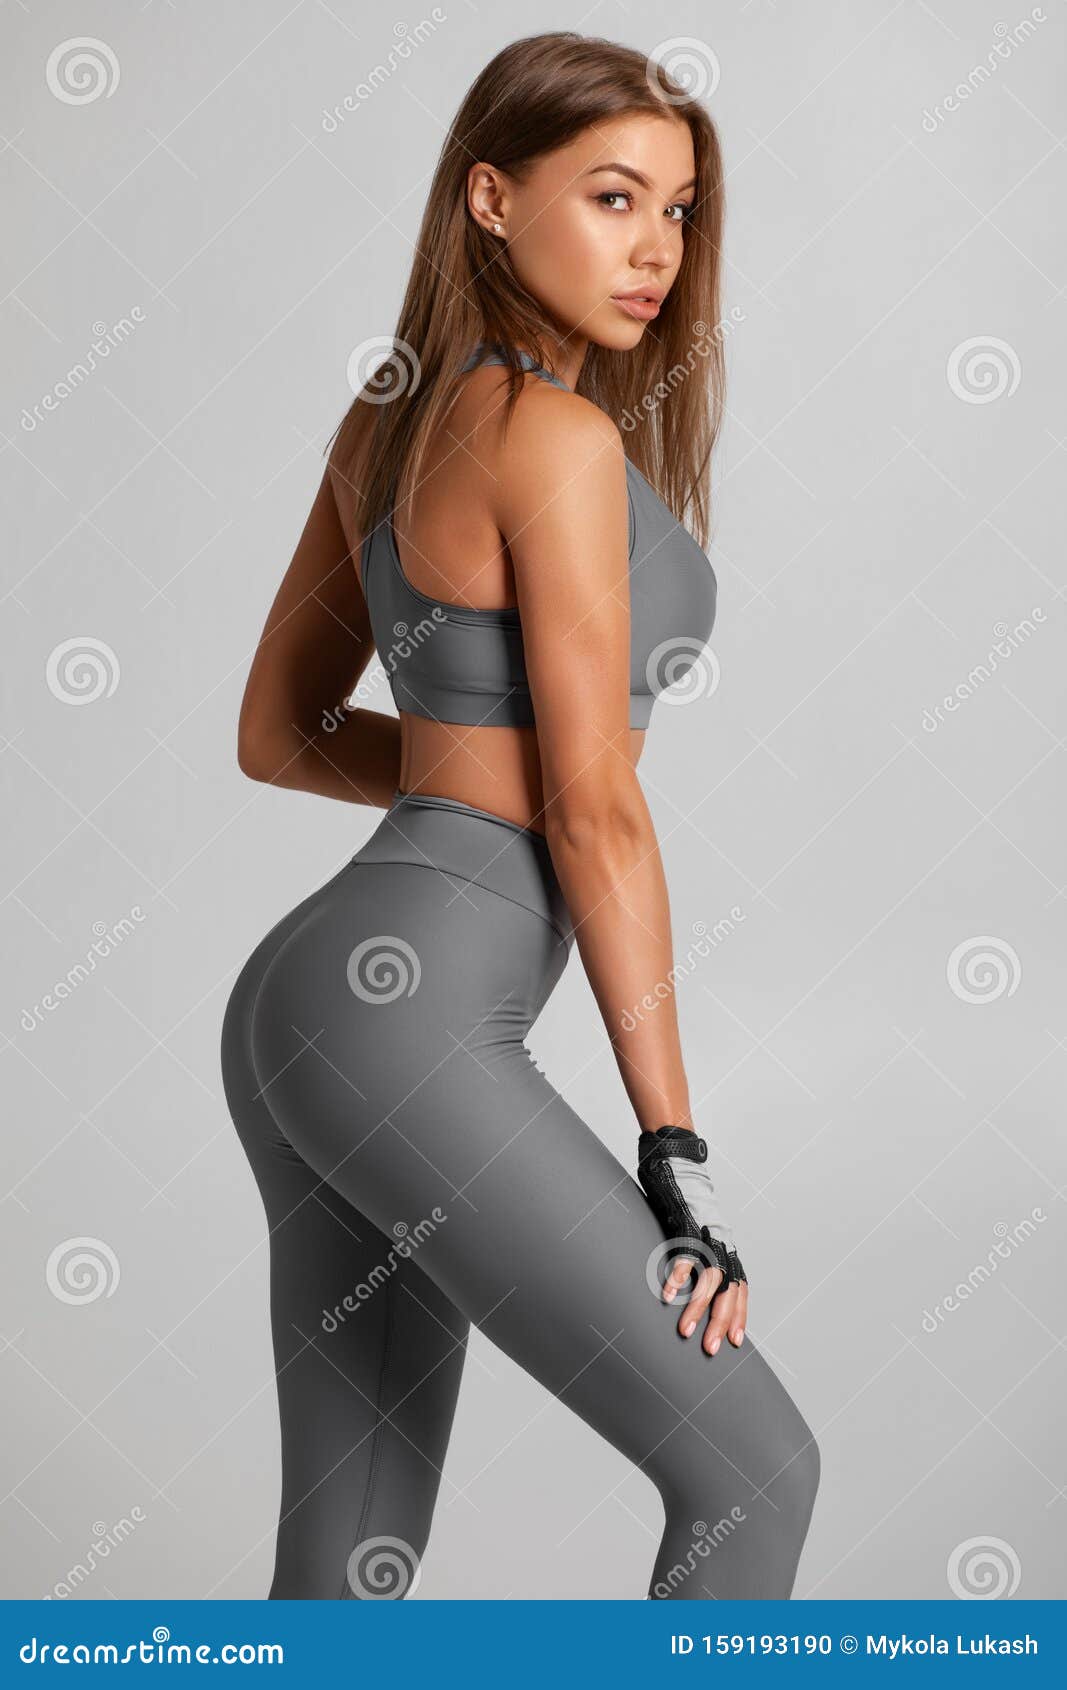 Fitness Woman. Beautiful Athletic Girl, Isolated on the Gray ...